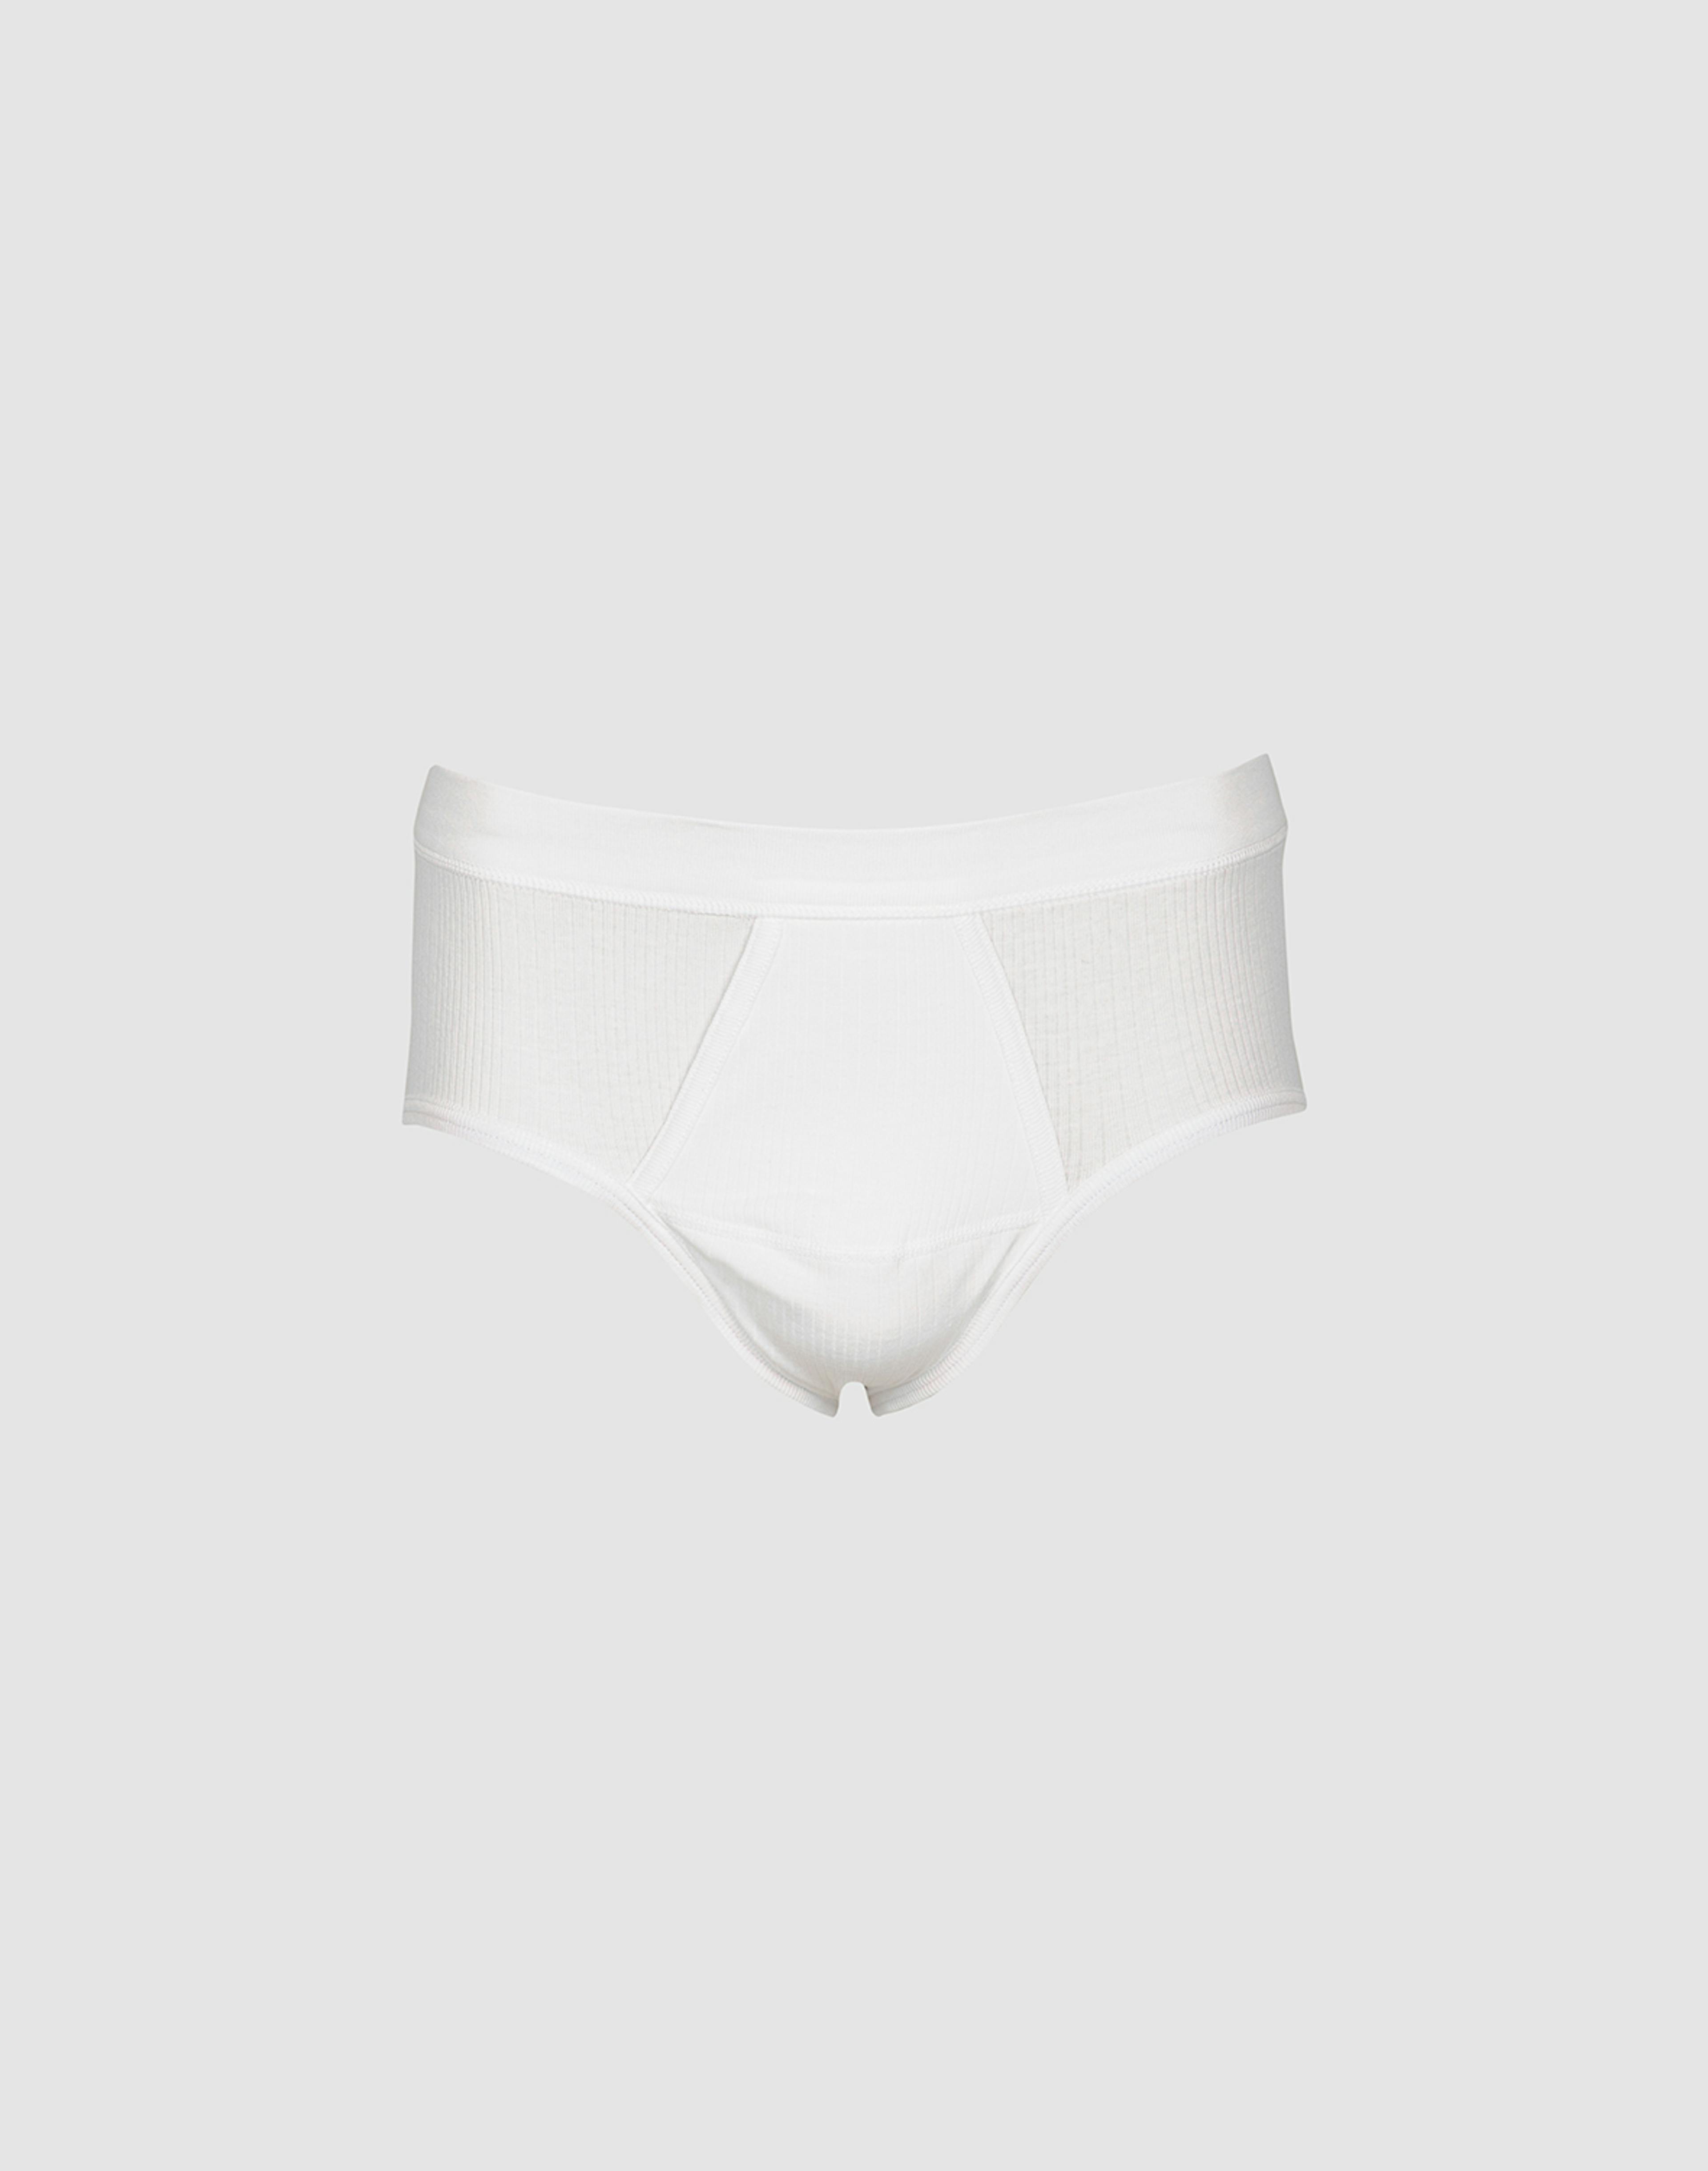 Men's classic cotton briefs with fly - White - Dilling